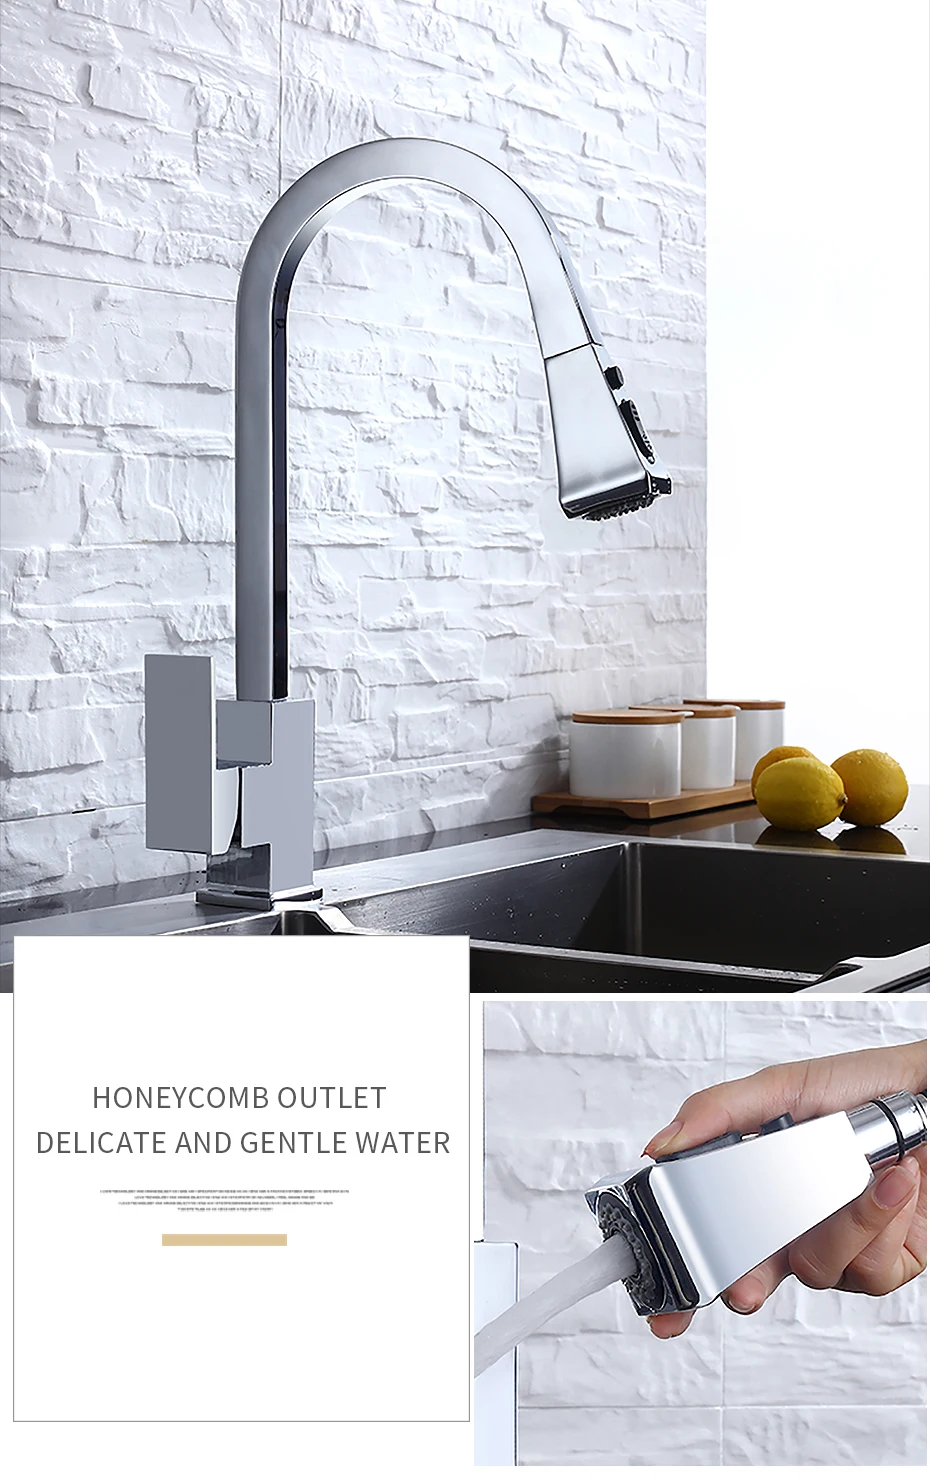 Kitchen Faucets Square Black Single Handle Pull Out Kitchen Tap Single Hole Swivel 360 Degree Rotation Water Mixer Tap 866399R